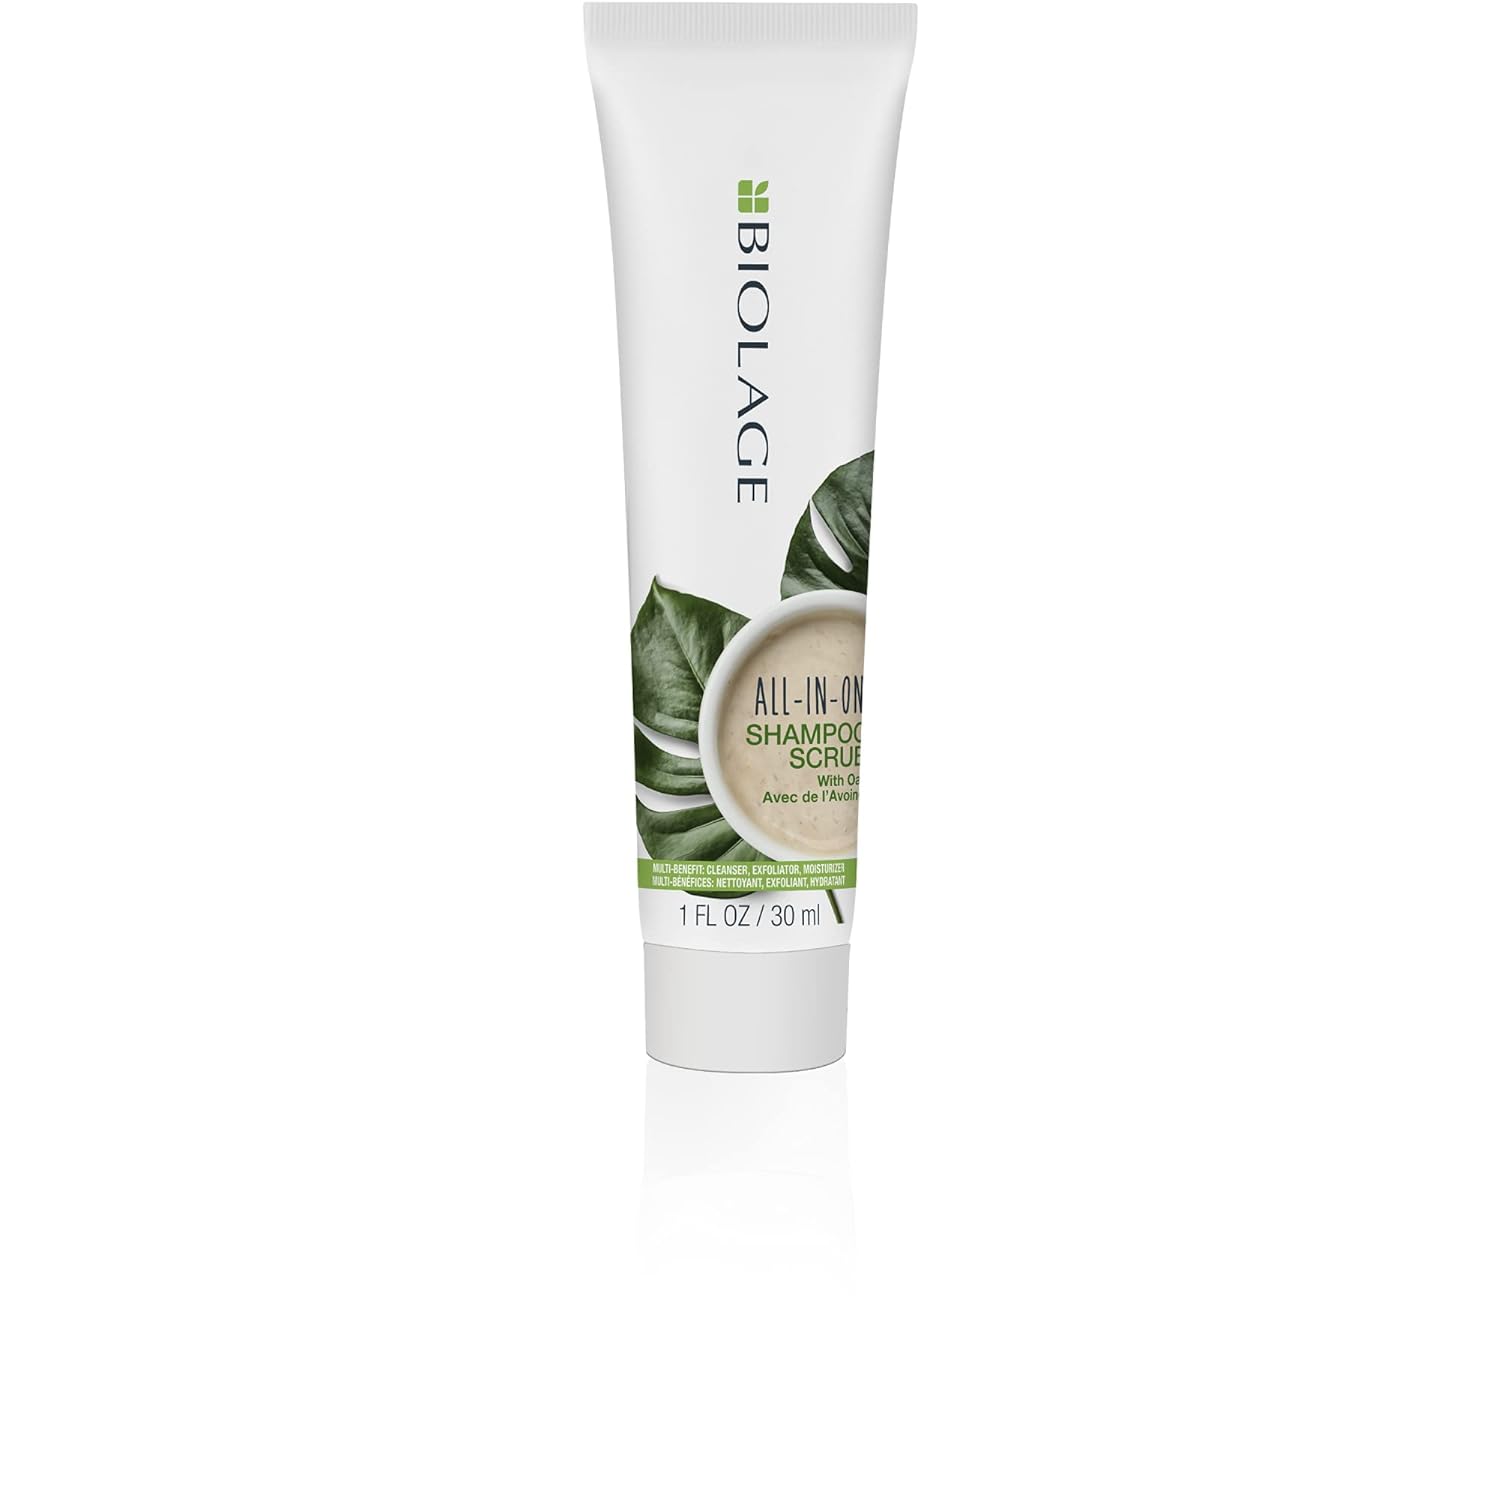 Biolage All-In-One Multi-Benefit Shampoo Scrub | Cleanses, Detoxifies & Gently Exfoliates Scalp | For All Hair Types | Vegan